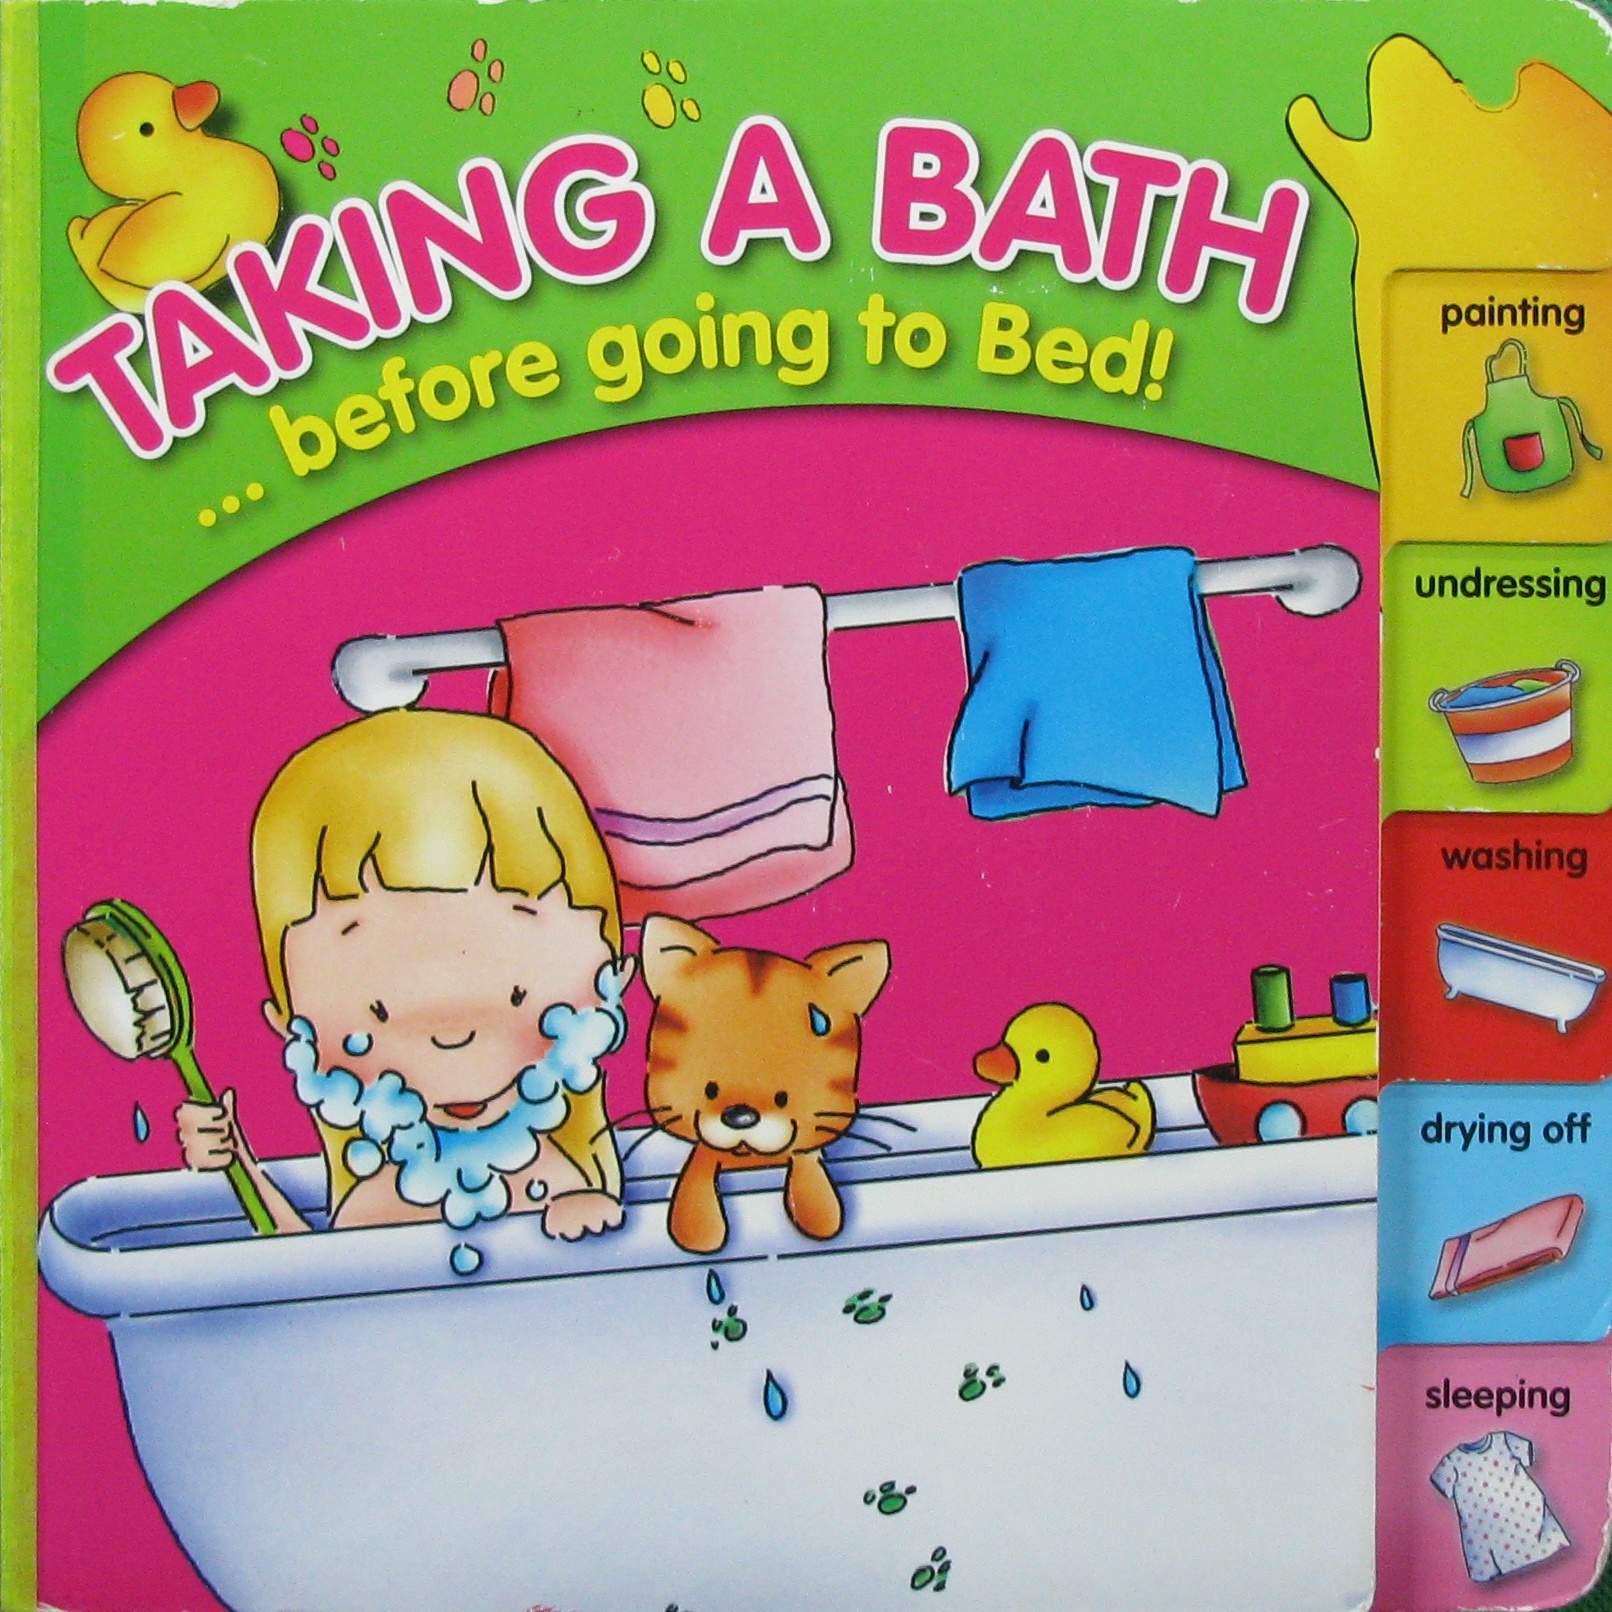 taking a bath before going to bed